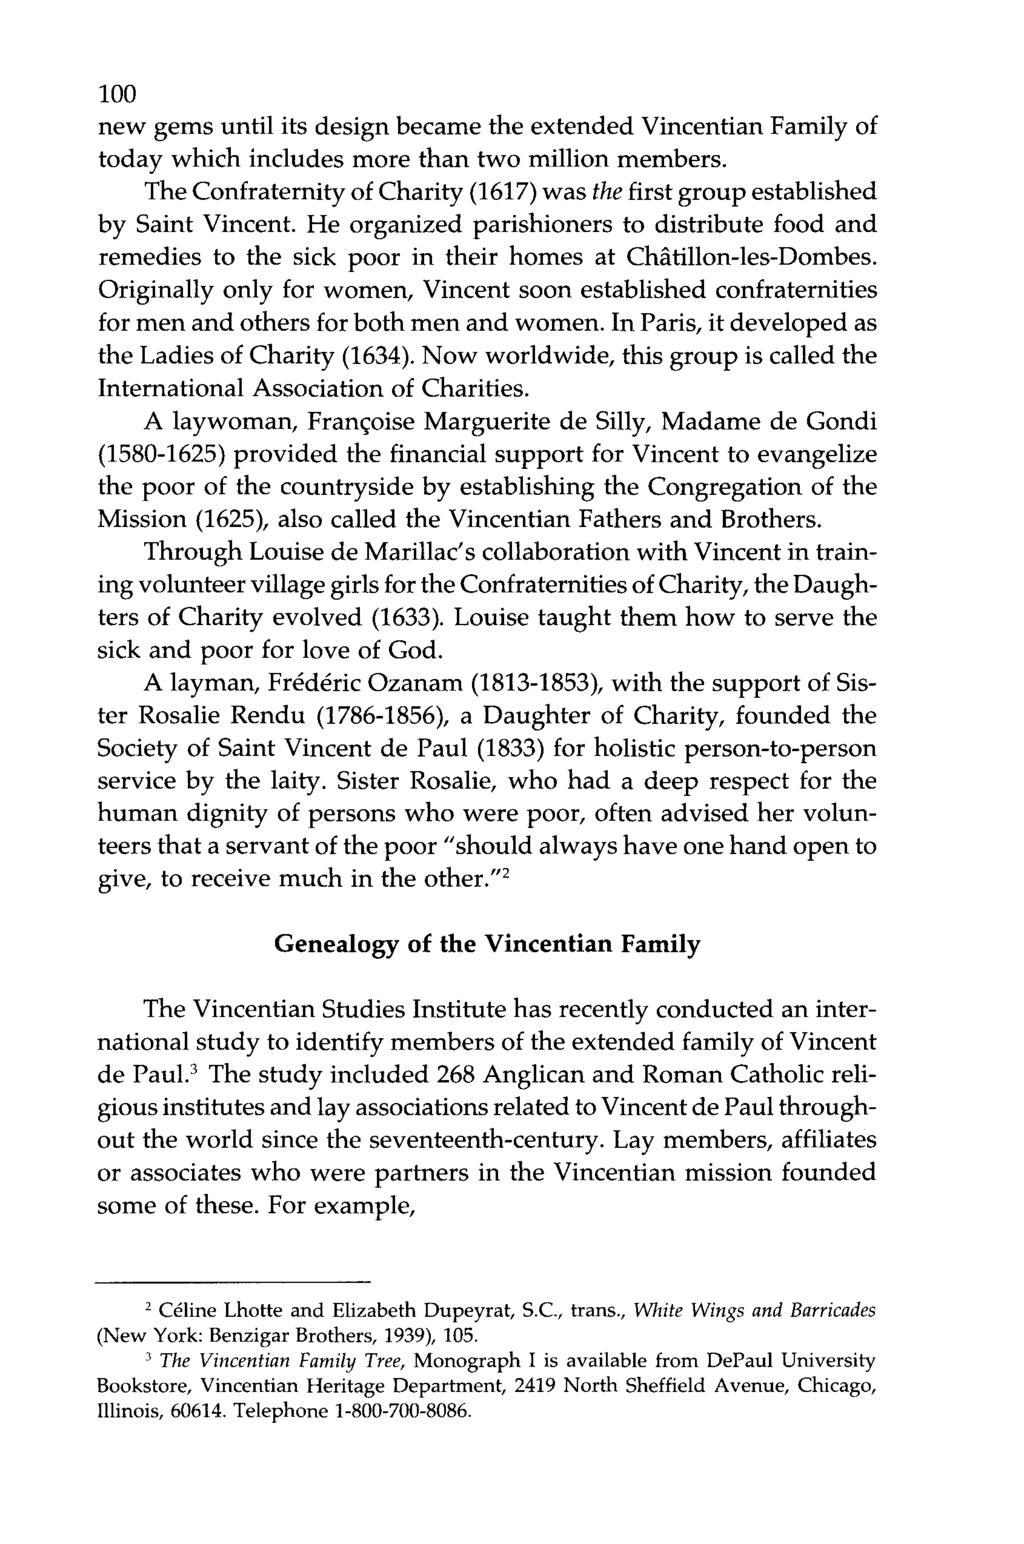 100 new gems until its design became the extended Vincentian Family of today which includes more than two million members.